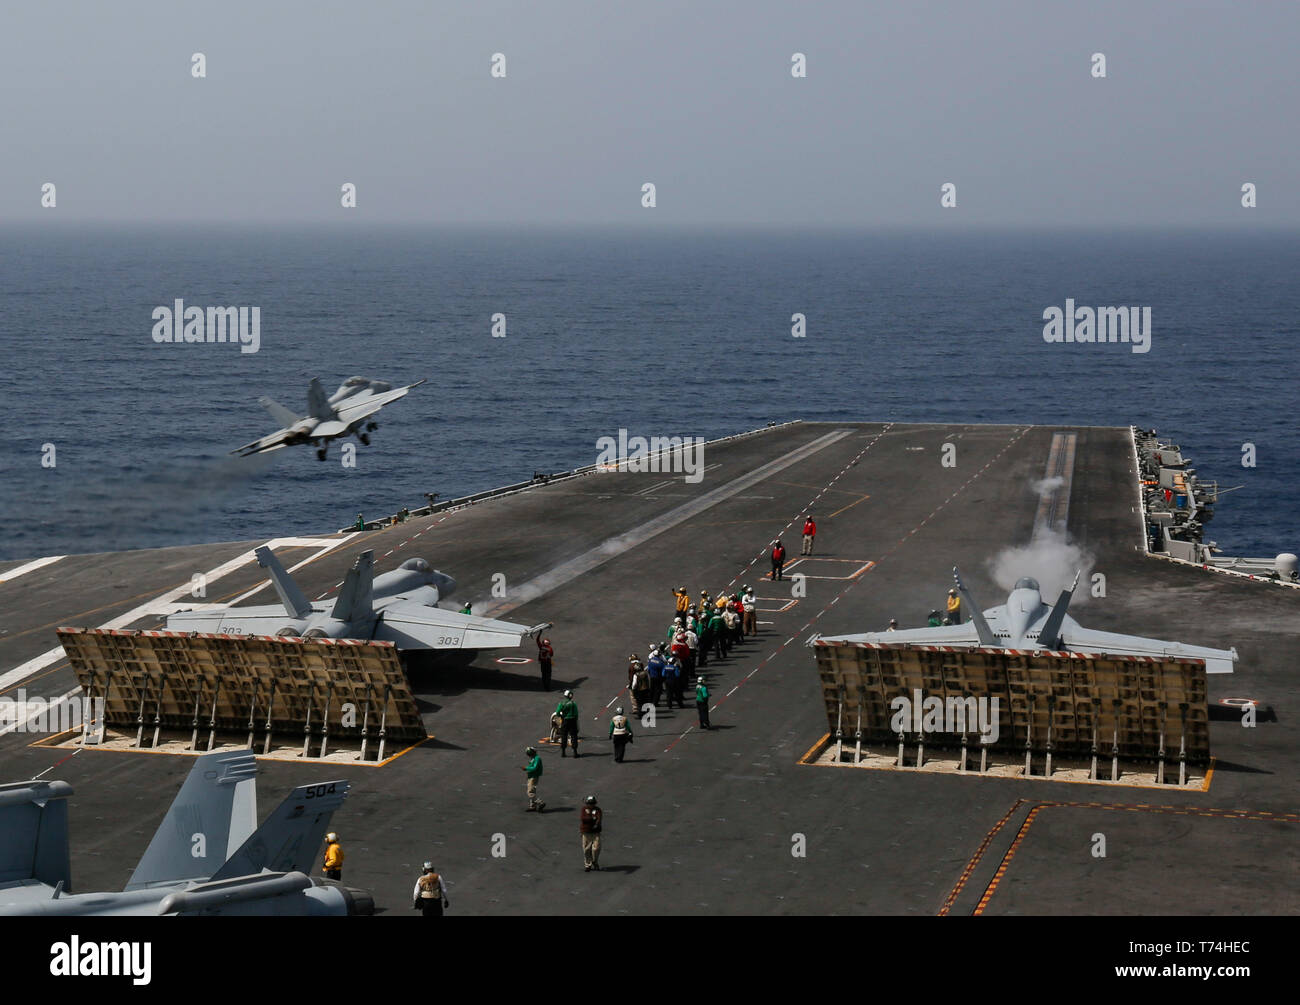 190427-N-MM912-1005  MEDITERRANEAN SEA  Two F/A-18E Super Hornets from the 'Freedom Fighters' of Carrier Air Wing (CVW) 7 prepare to launch from the flight deck of the Nimitz-class aircraft carrier USS Abraham Lincoln (CVN 72) as an F/A-18F Super Hornet from the 'Jolly Rogers' of Strike Fighter Squadron (VFA) 103 launches from the flight deck. Abraham Lincoln is deployed as part of the Abraham Lincoln Carrier Strike Group (ABECSG) in support of maritime security cooperation efforts in the U.S. 5th, U.S. 6th and U.S. 7th Fleet areas of operation. With Abraham Lincoln as the flagship, deployed s Stock Photo